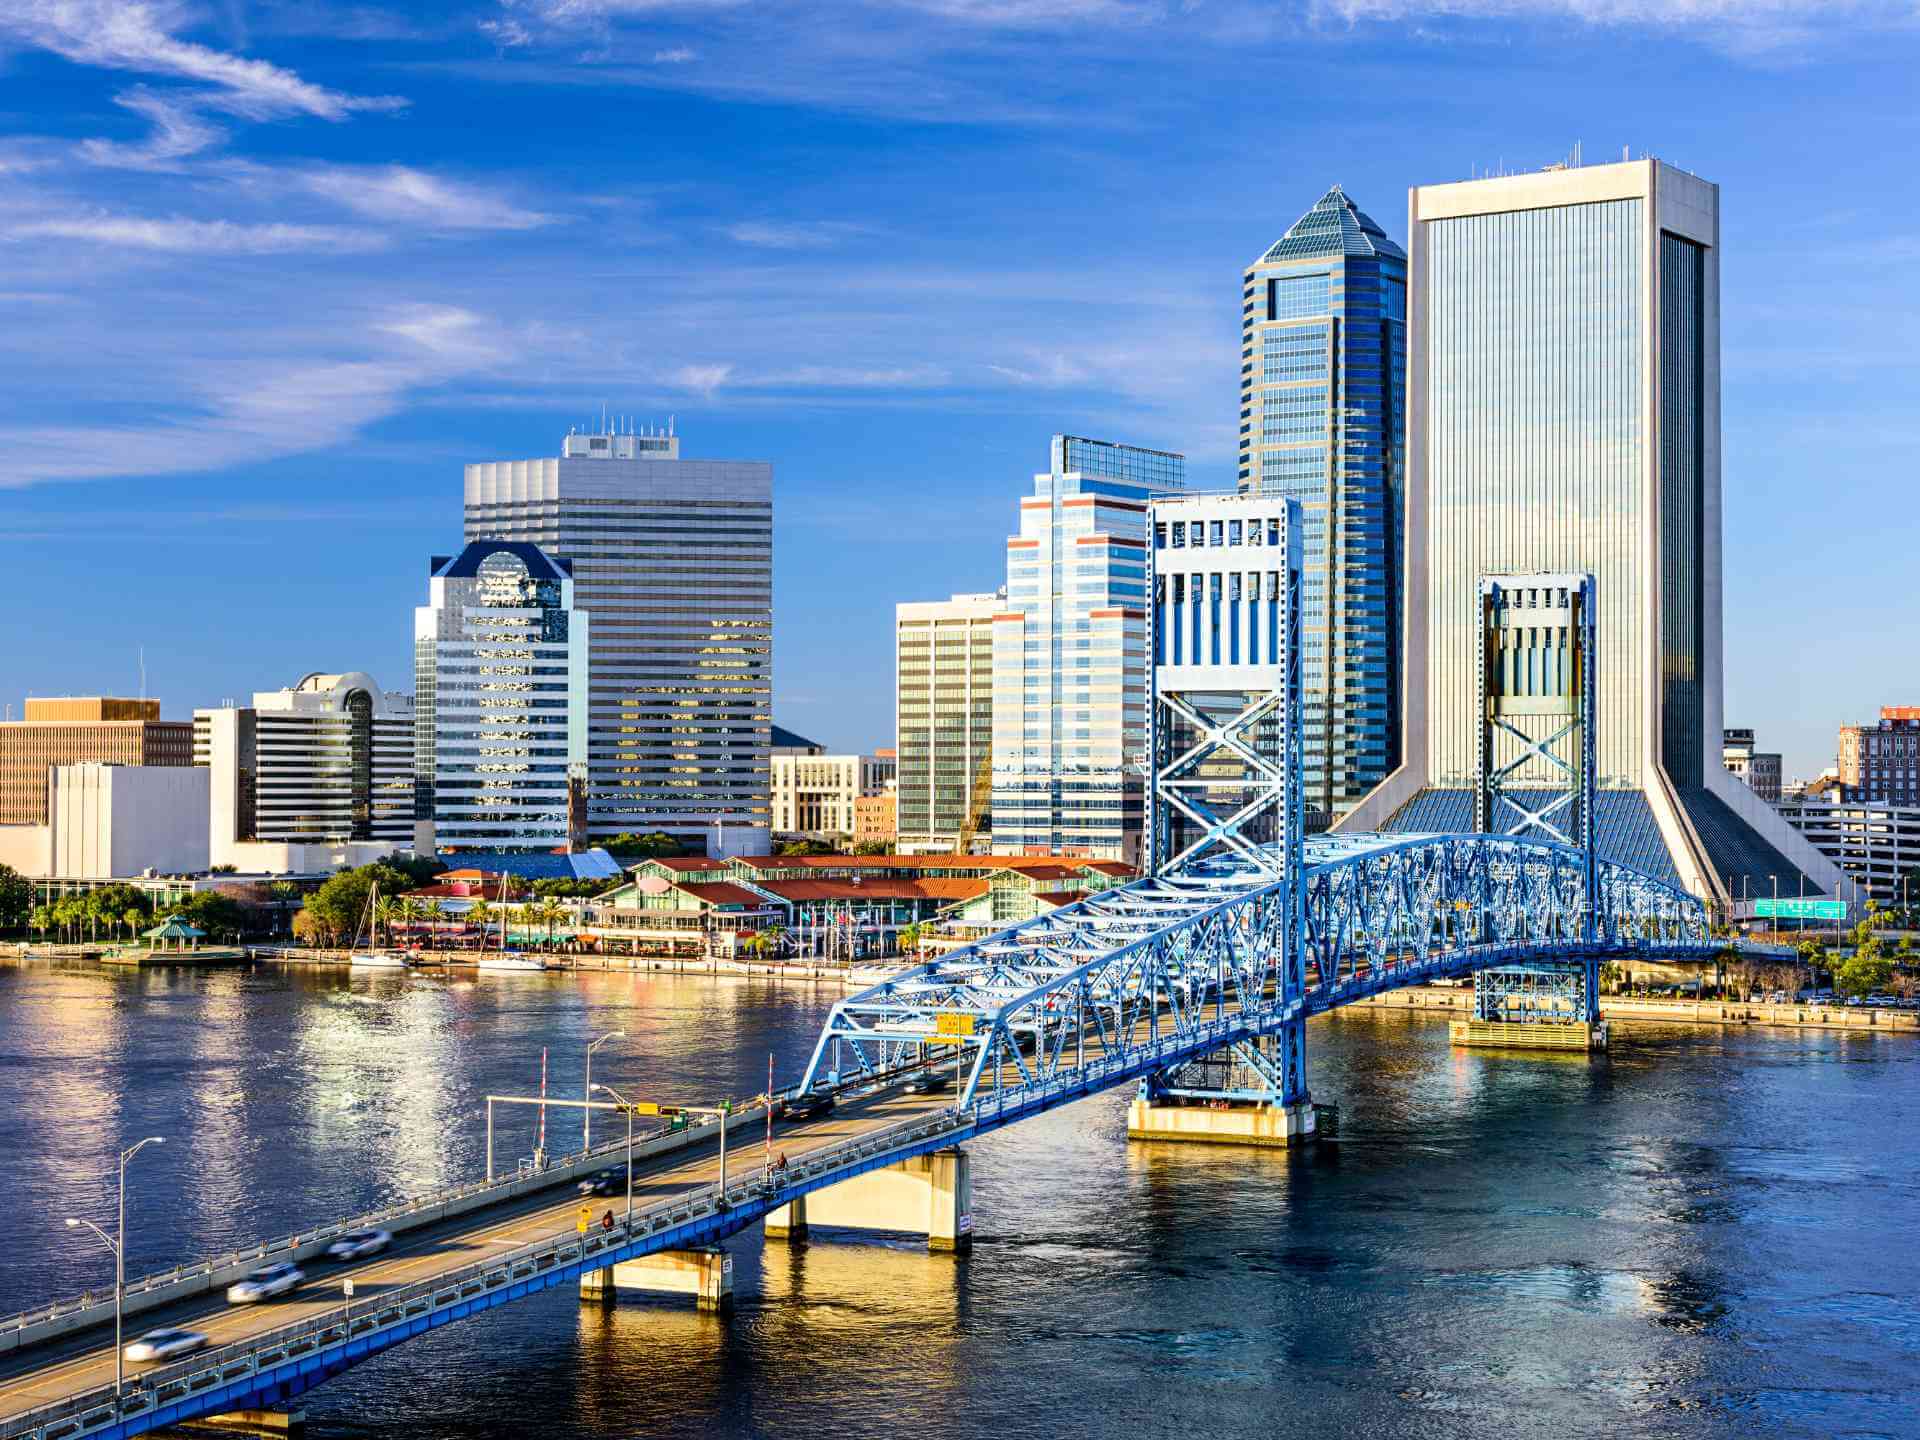 15 Things to Do in Jacksonville, FL